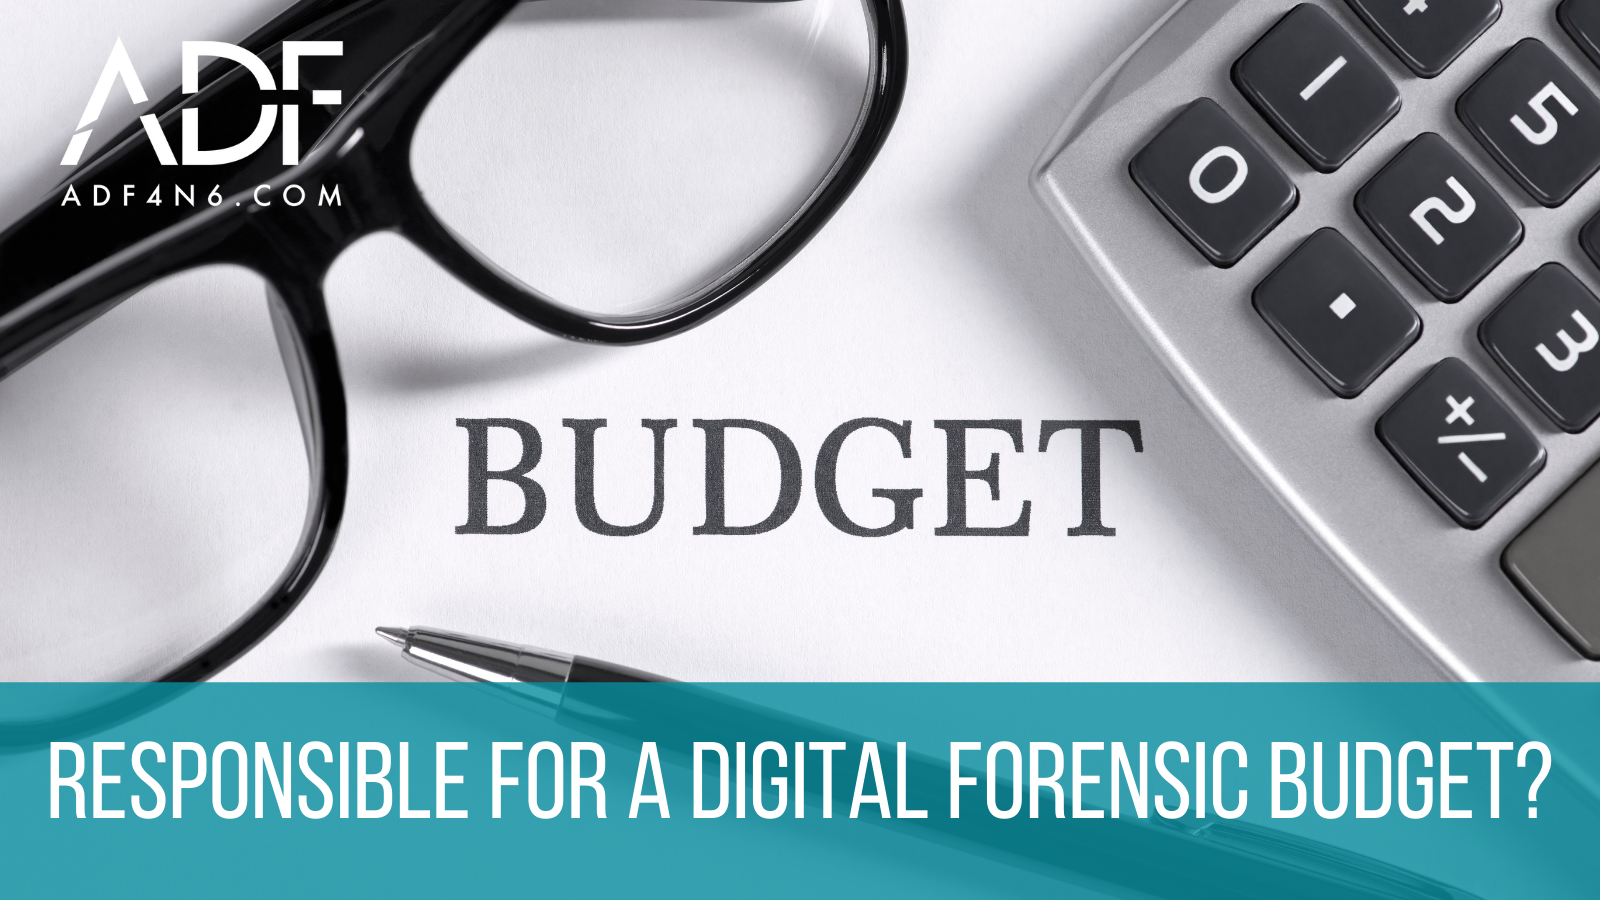 Responsible for a Digital Forensics Budget? 10 Reasons Why to go with ADF